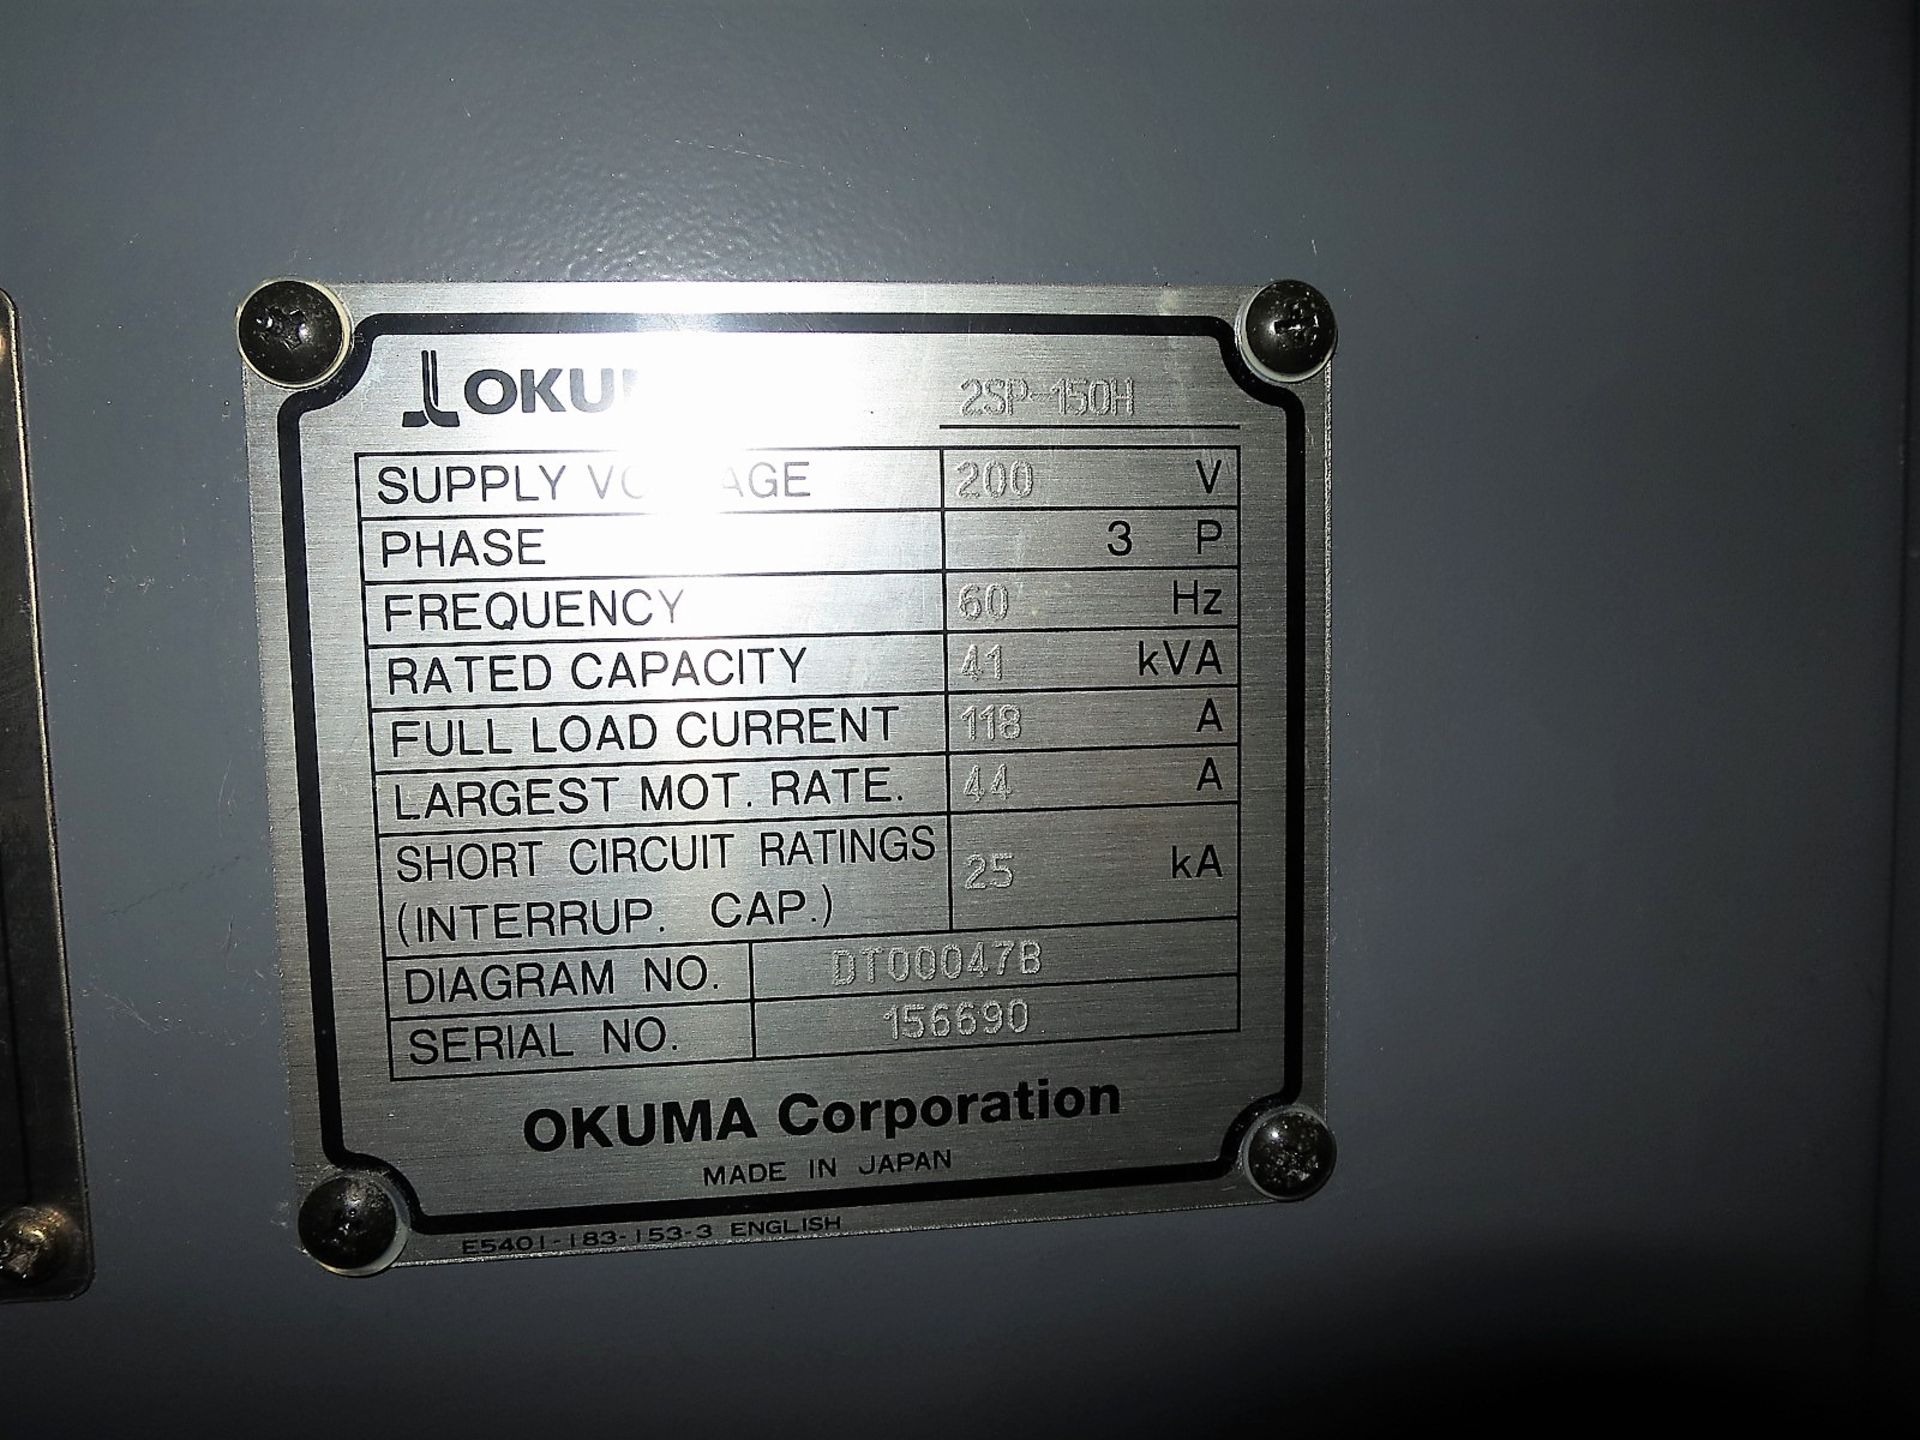 Okuma 2SP-150HM Twin Spindle 3-Axis Turning Center w/Live Milling, S/N 156690, New 2011 - Image 12 of 12